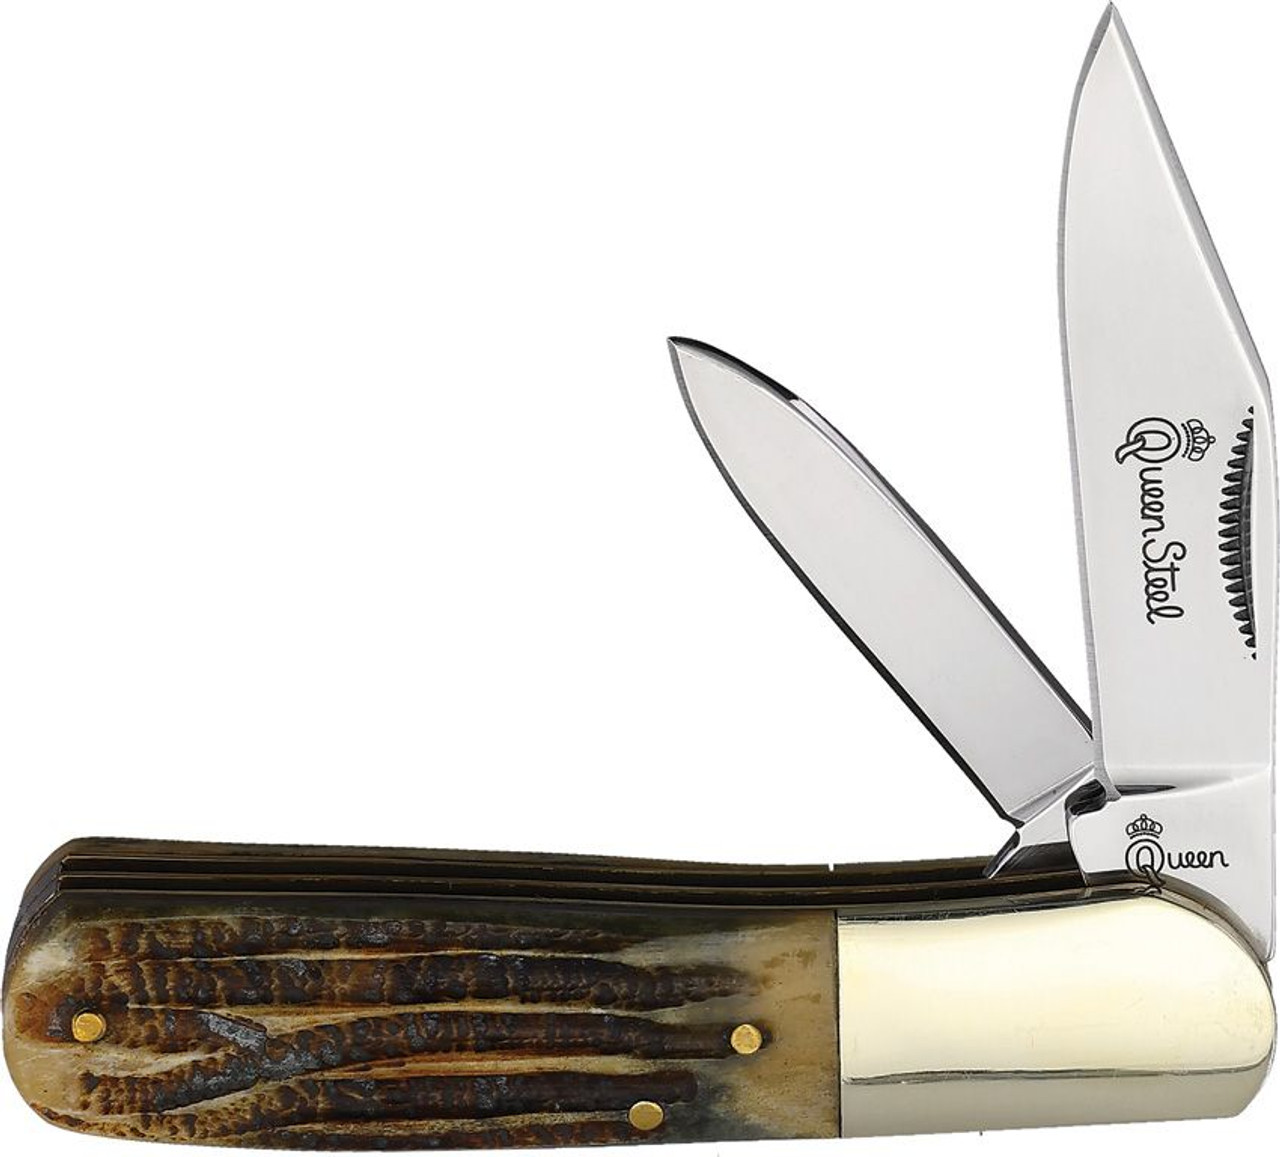 Queen Cutlery Barlow (QN22WB) - Mirror Finish 440C Stainless Steel Clip and Pen Blades, Winterbottom Jigged Bone Handle